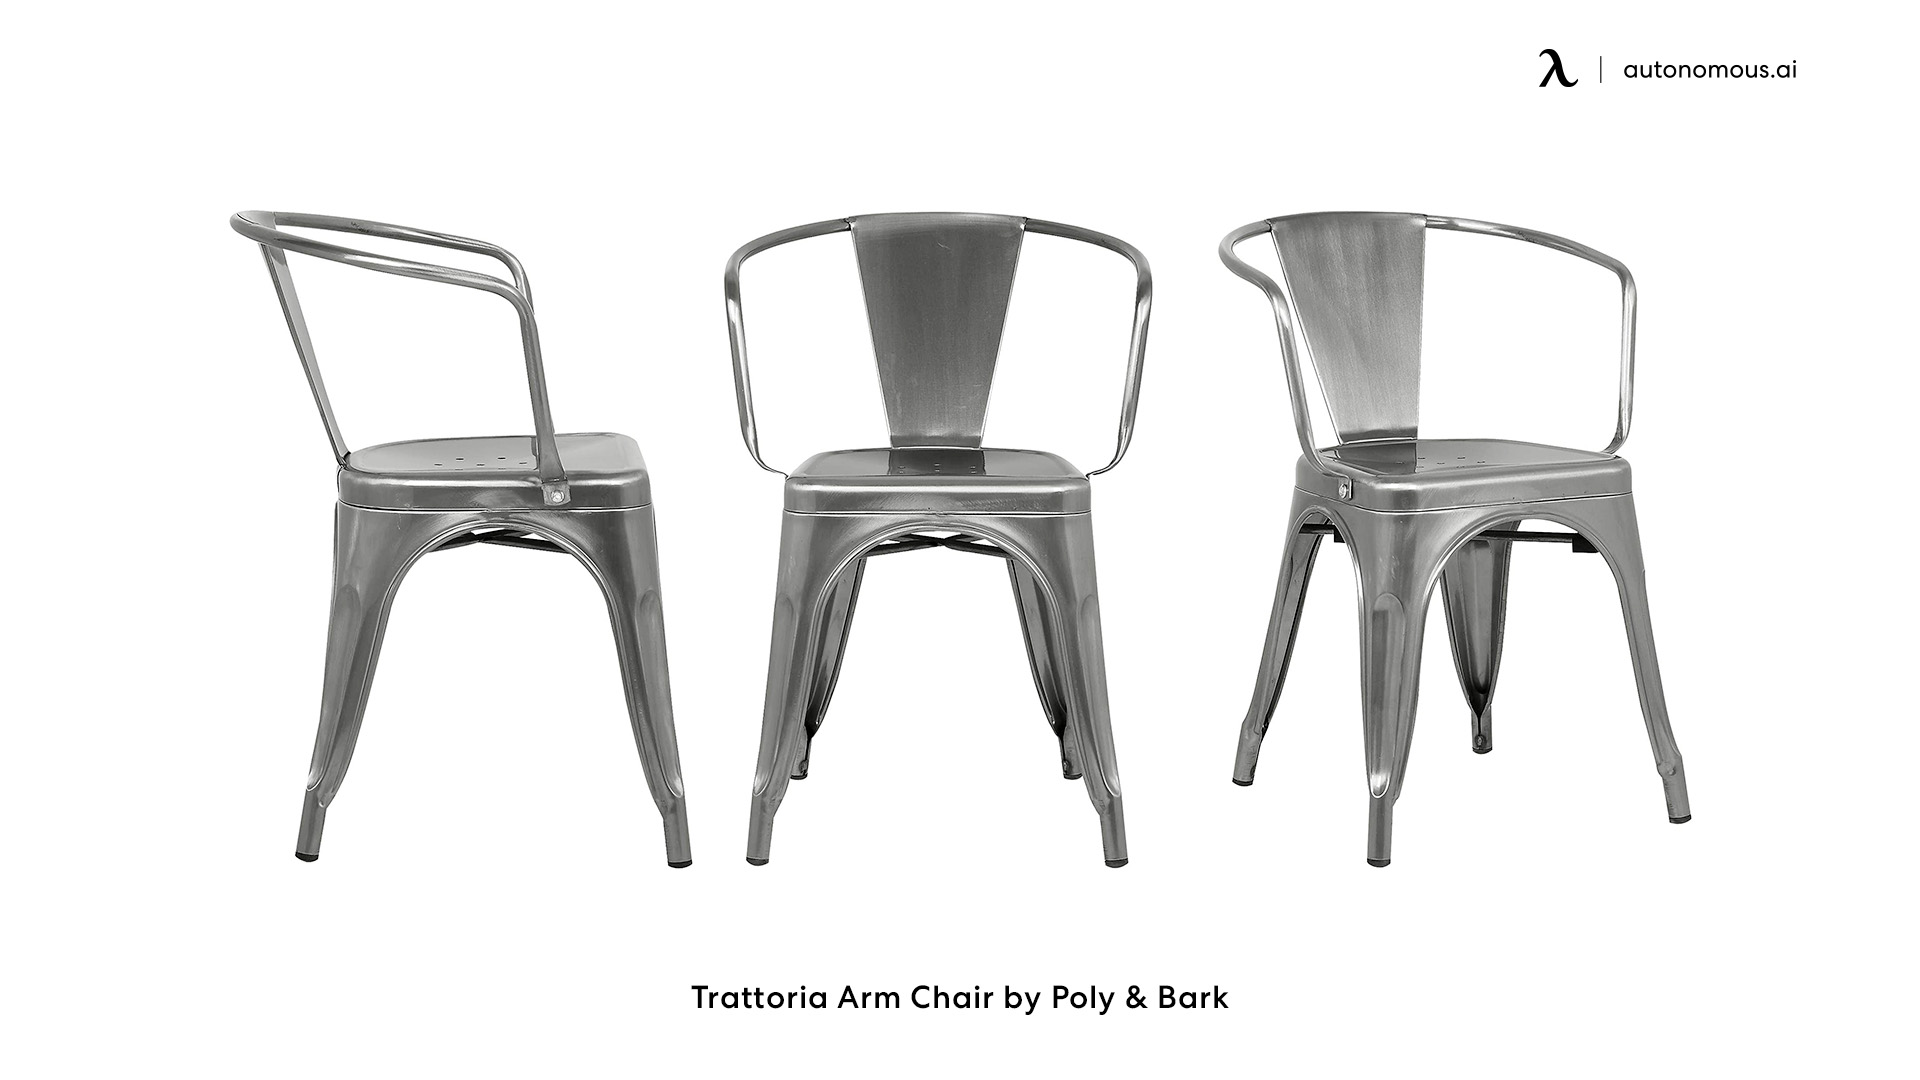 Trattoria Arm Chair by Poly & Bark